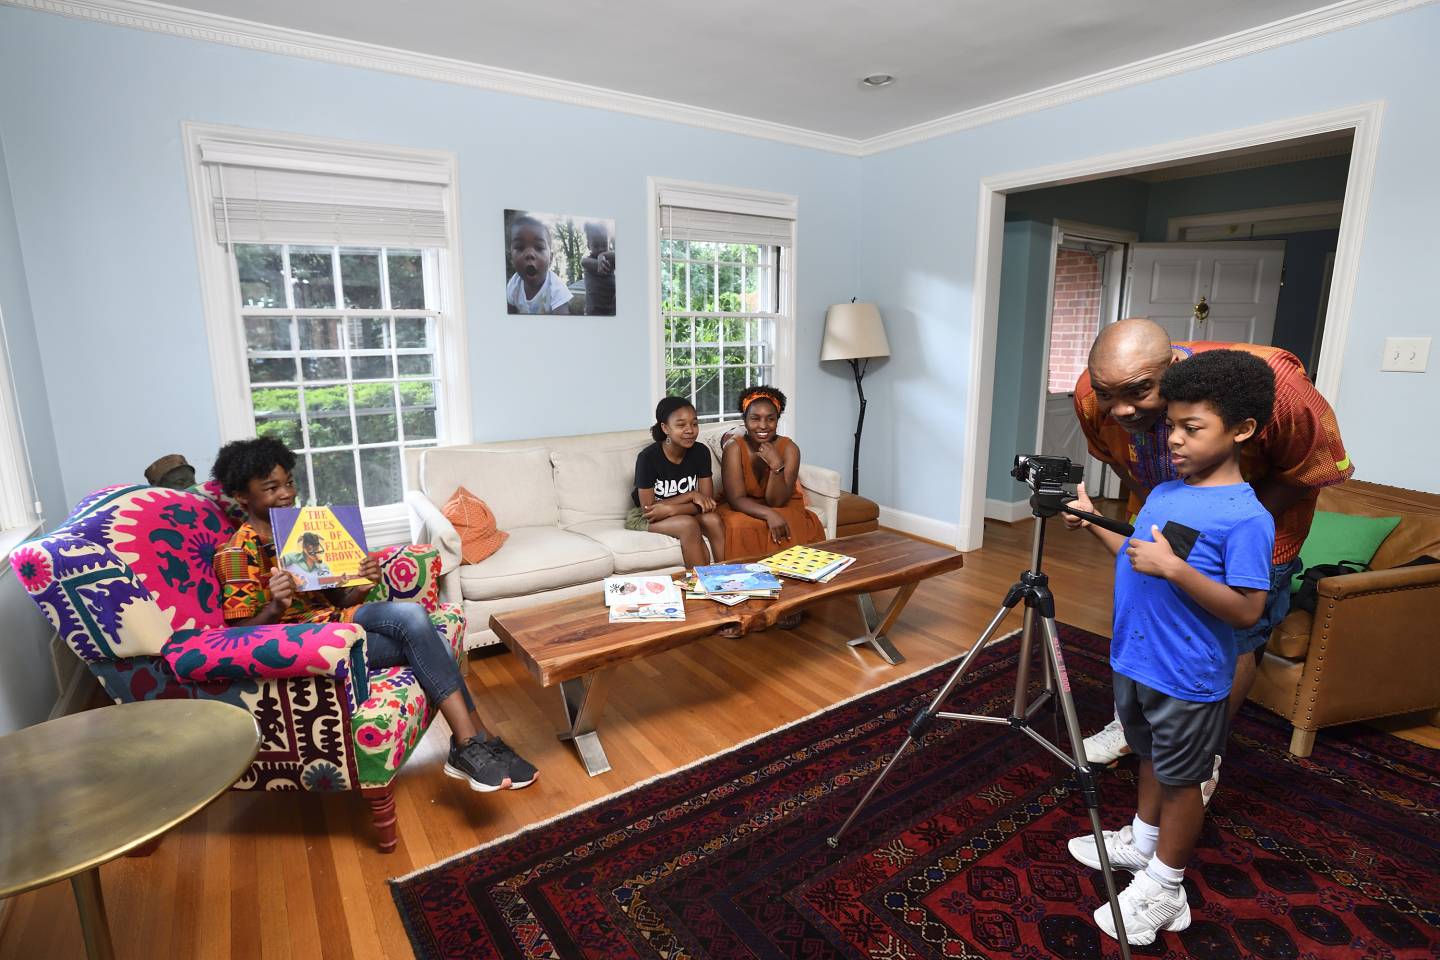 A family records a video in their living room